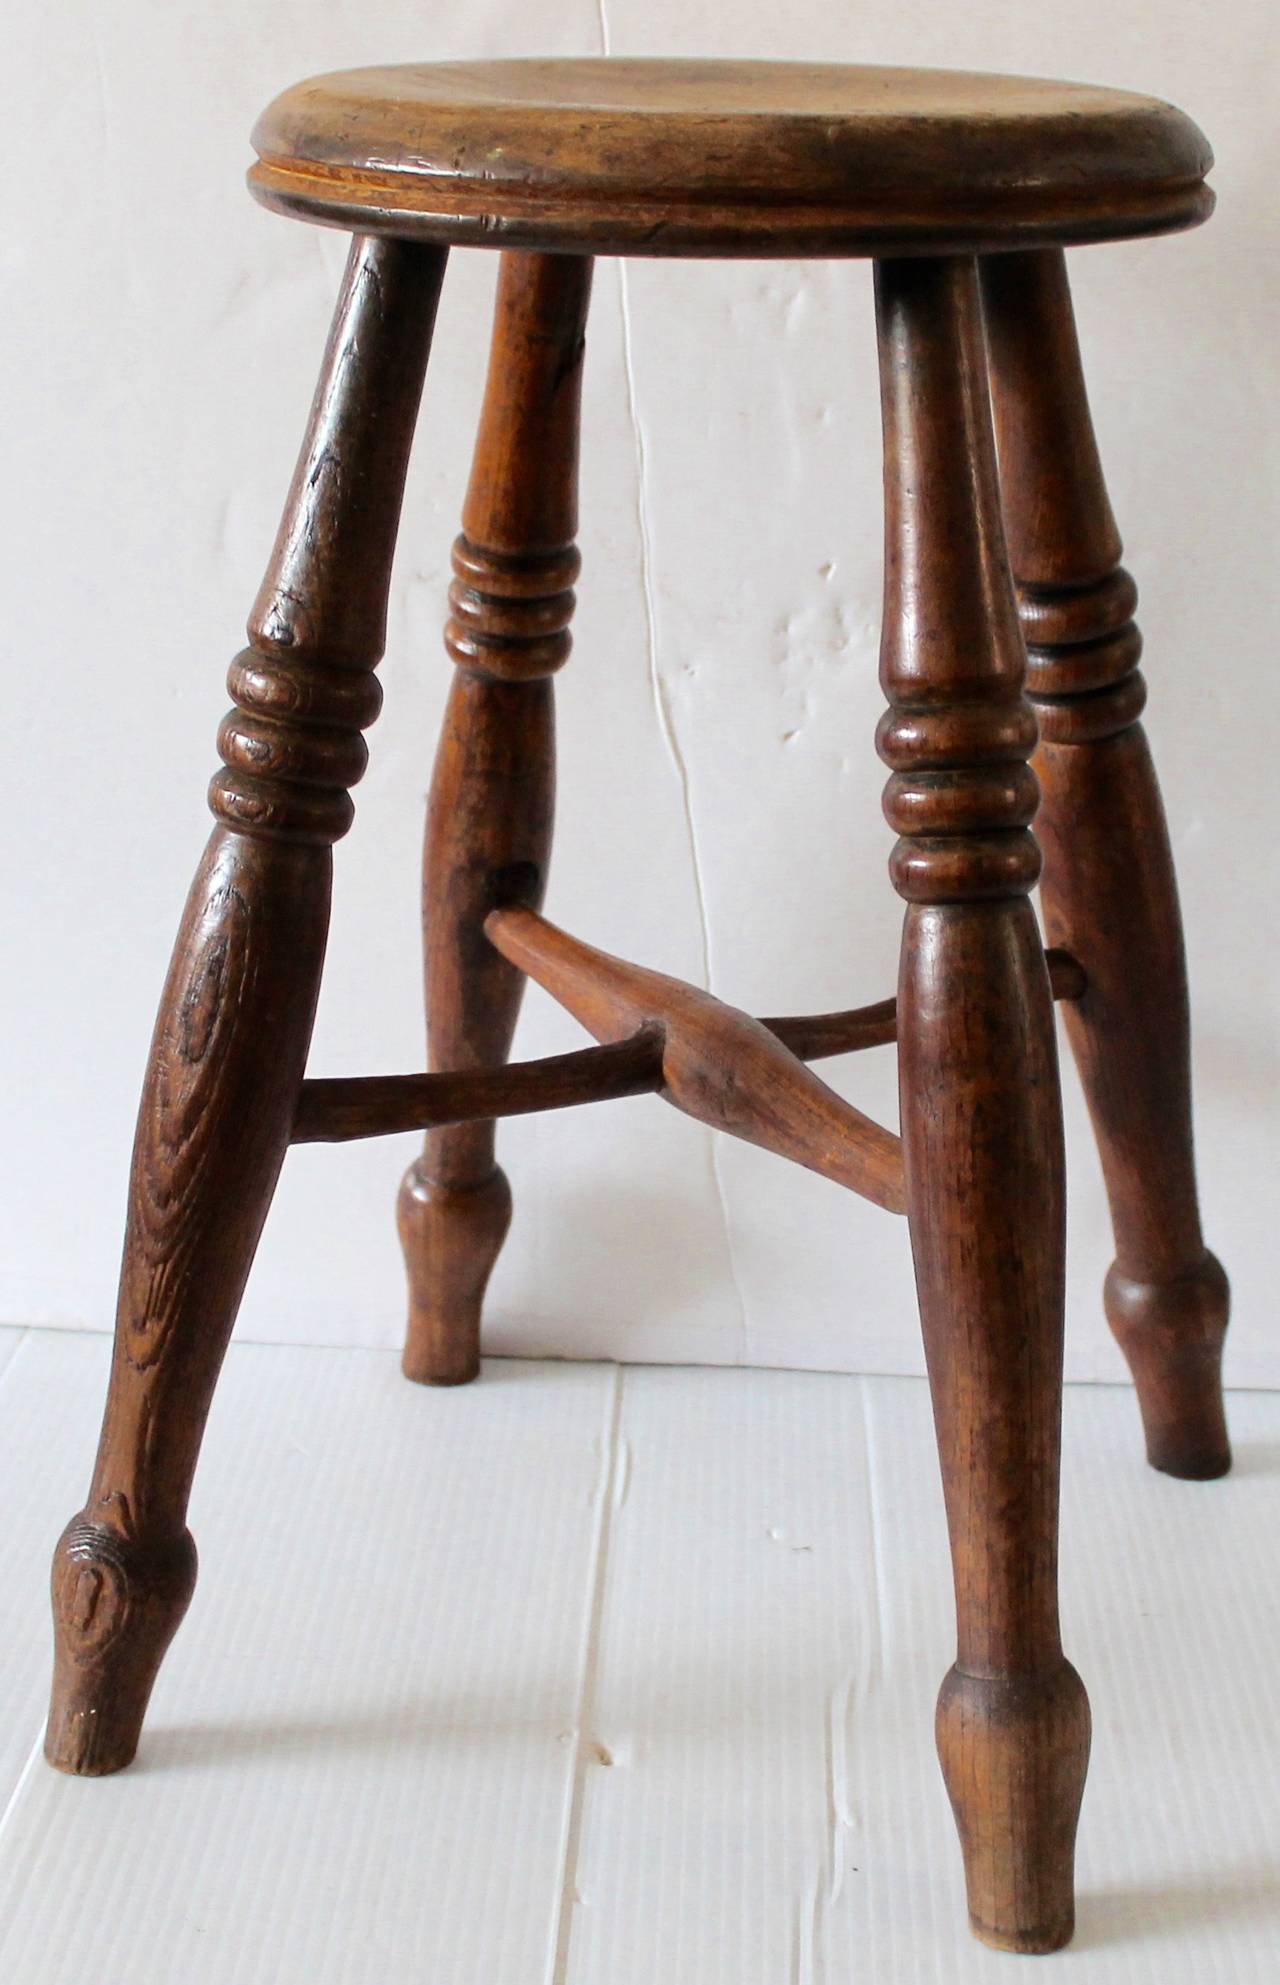 This is such a nice country hand made stool from the early 19thc and in walnut wood. The condition is good and sturdy.